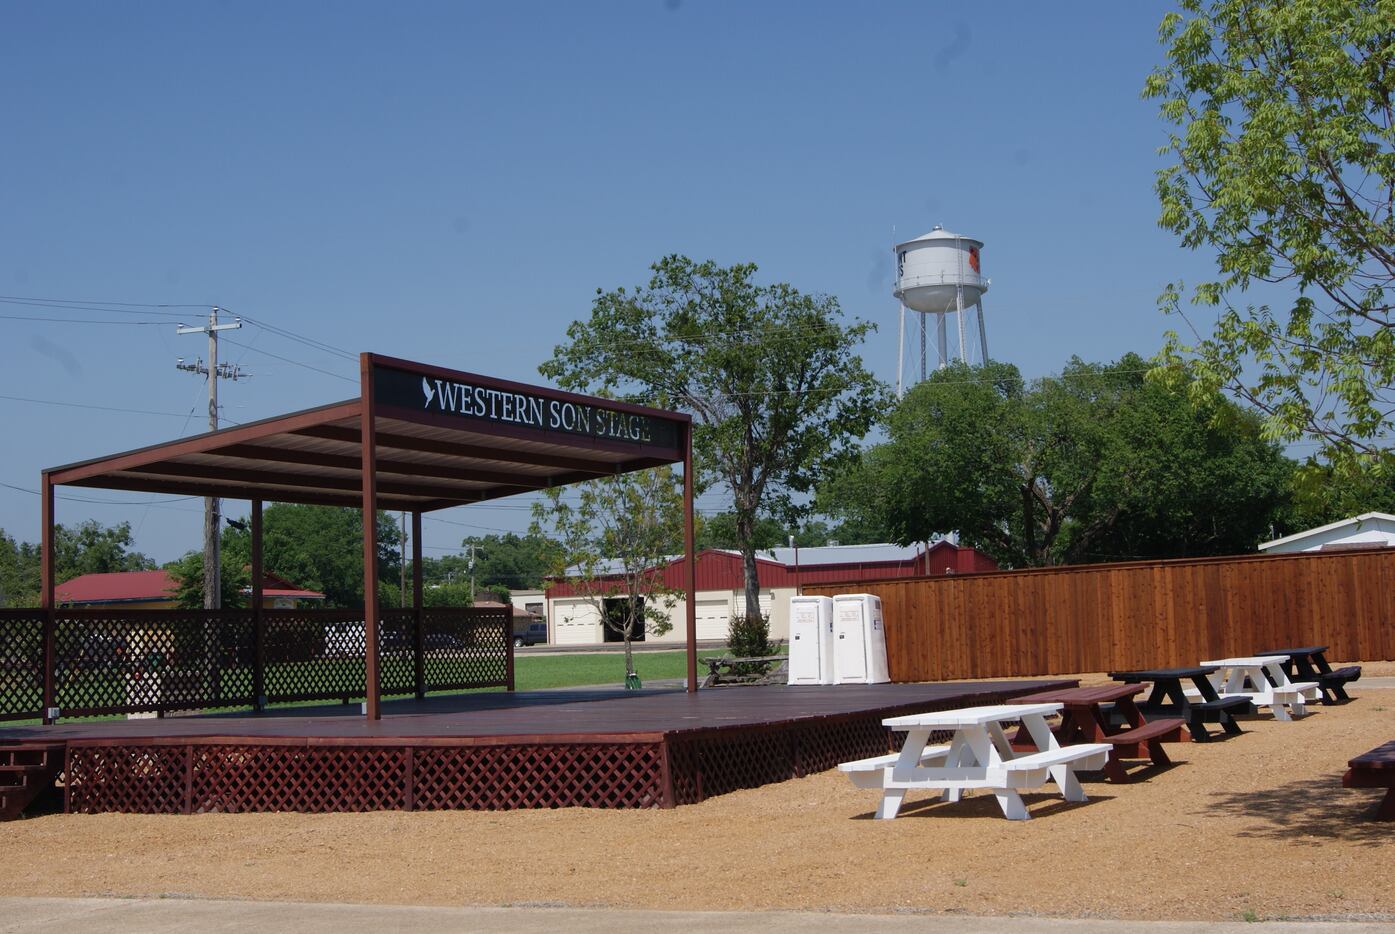 The Western Son stage is located outside Whistle Post Brewing Co. and Western Son Distillery...